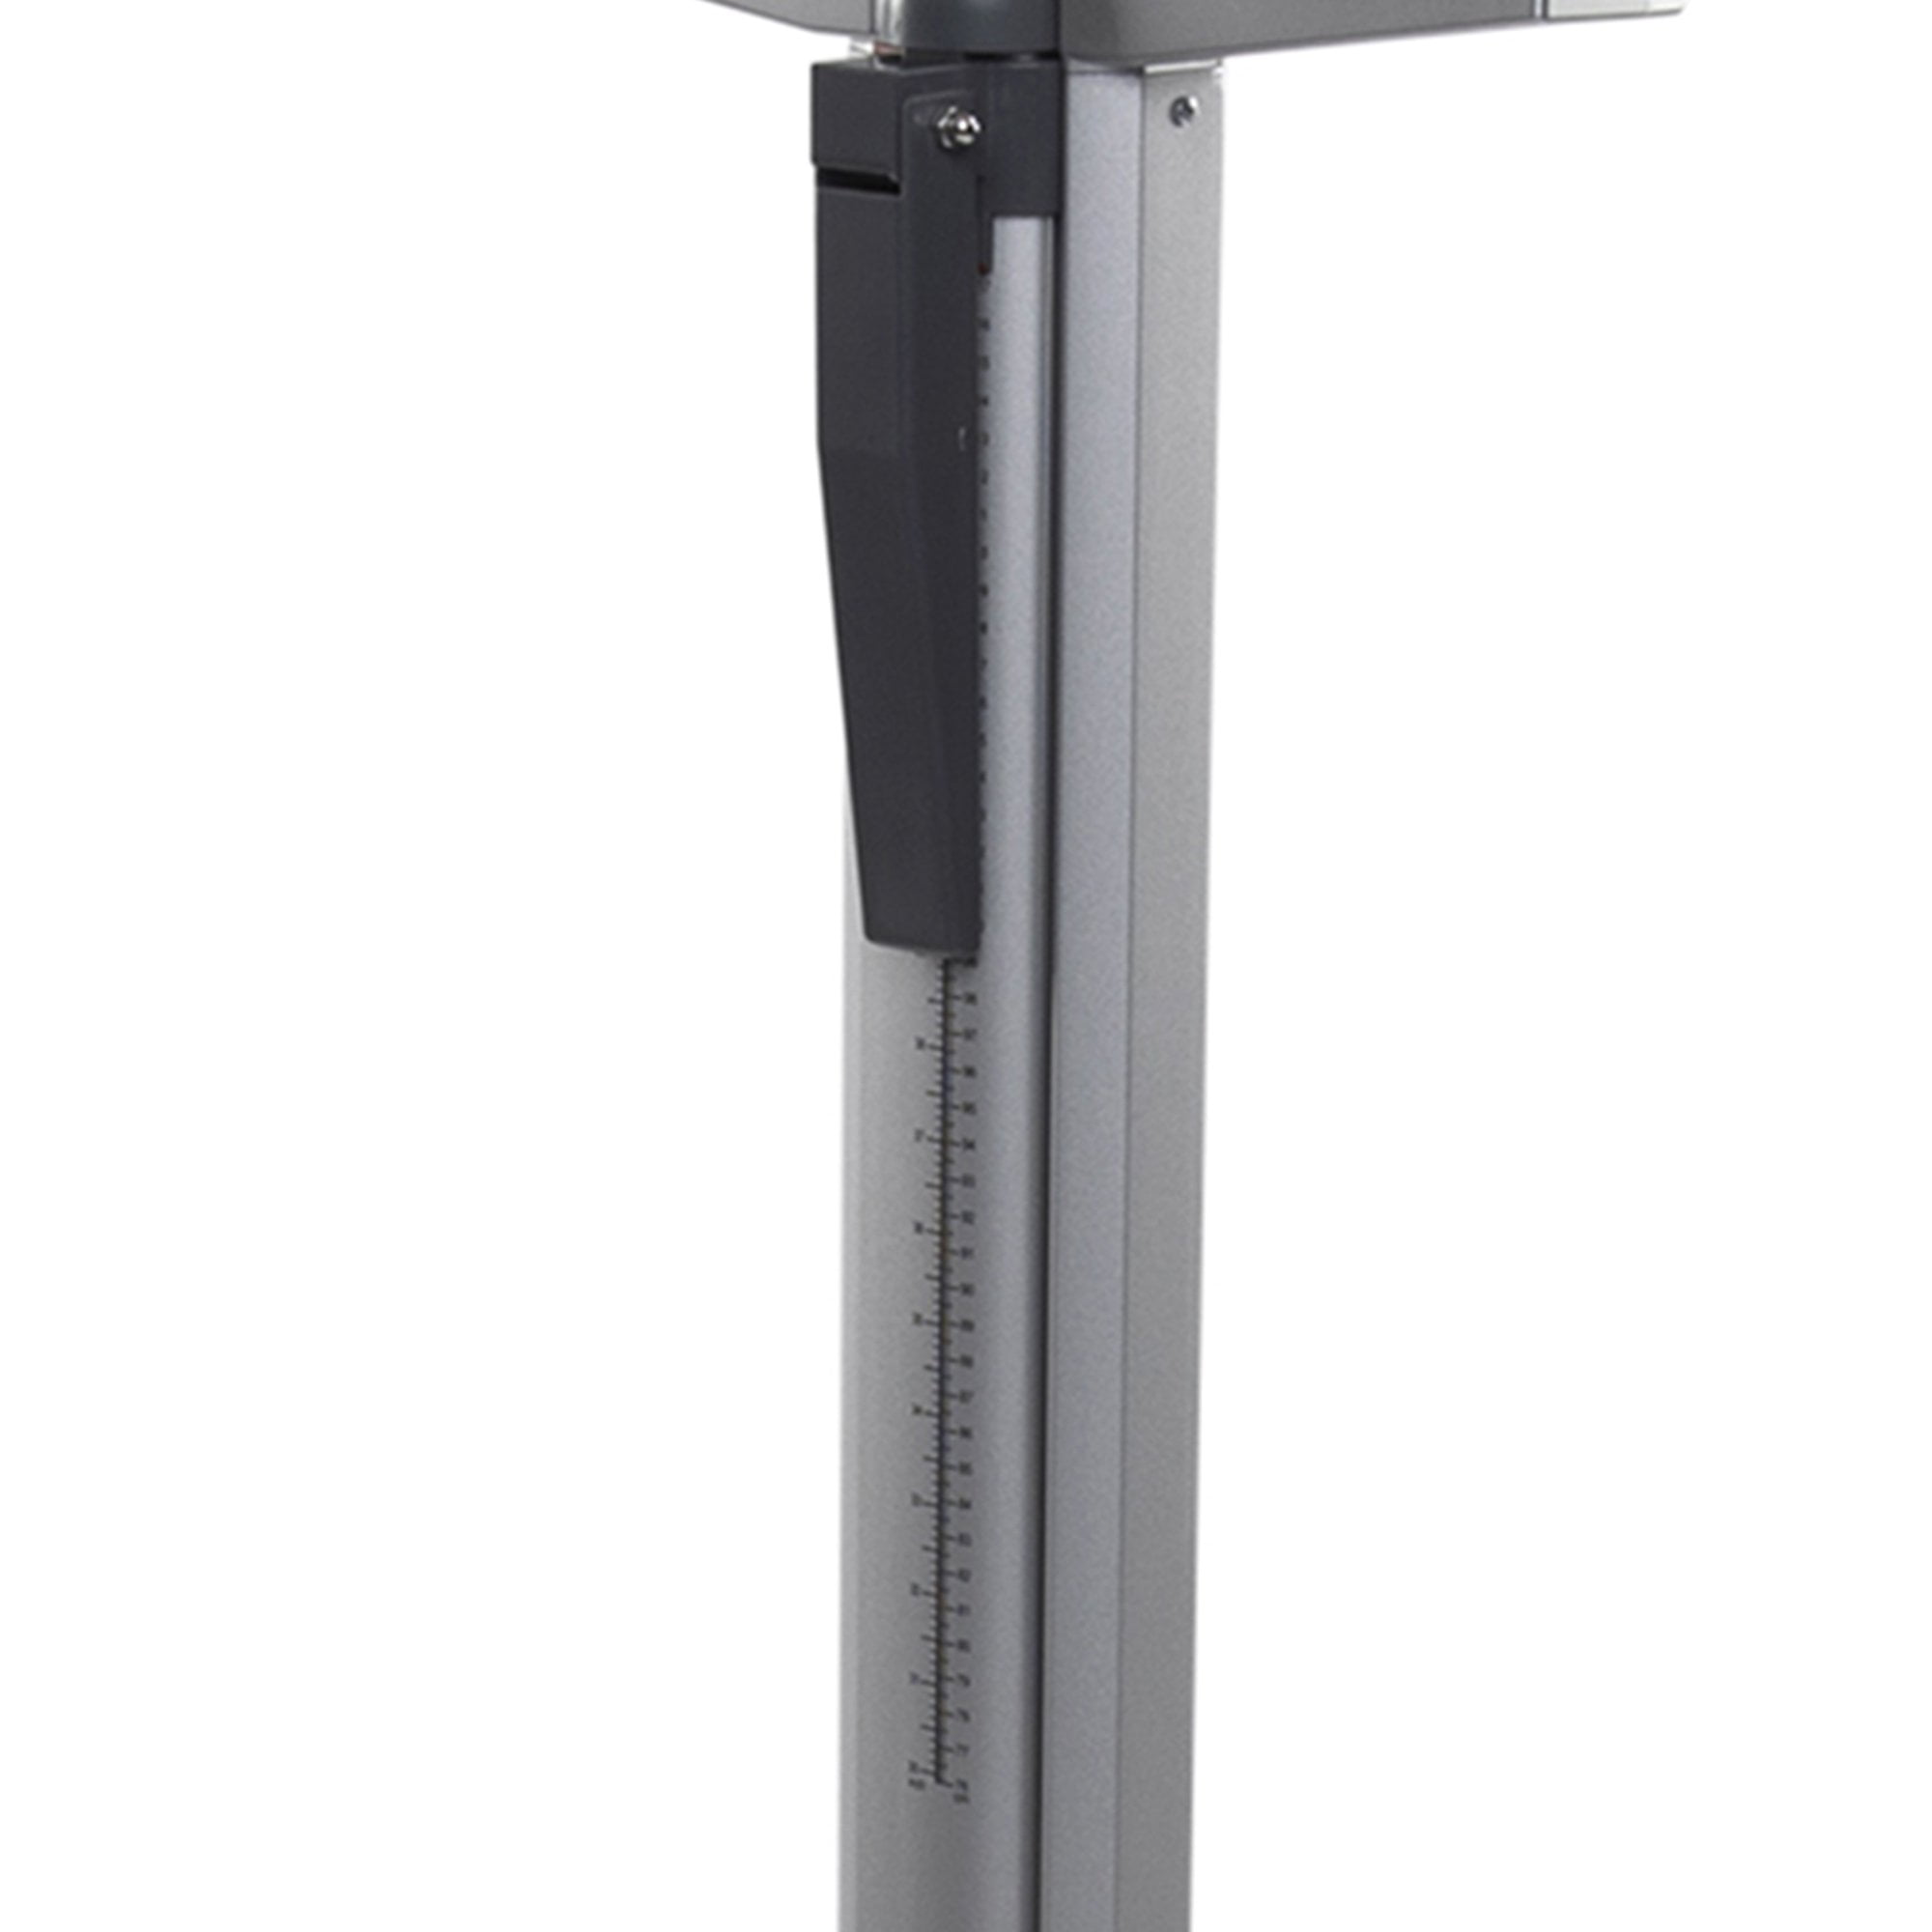 Health O Meter Digital Column Scale with Height Rod 550 lbs / 250 kg  Capacity